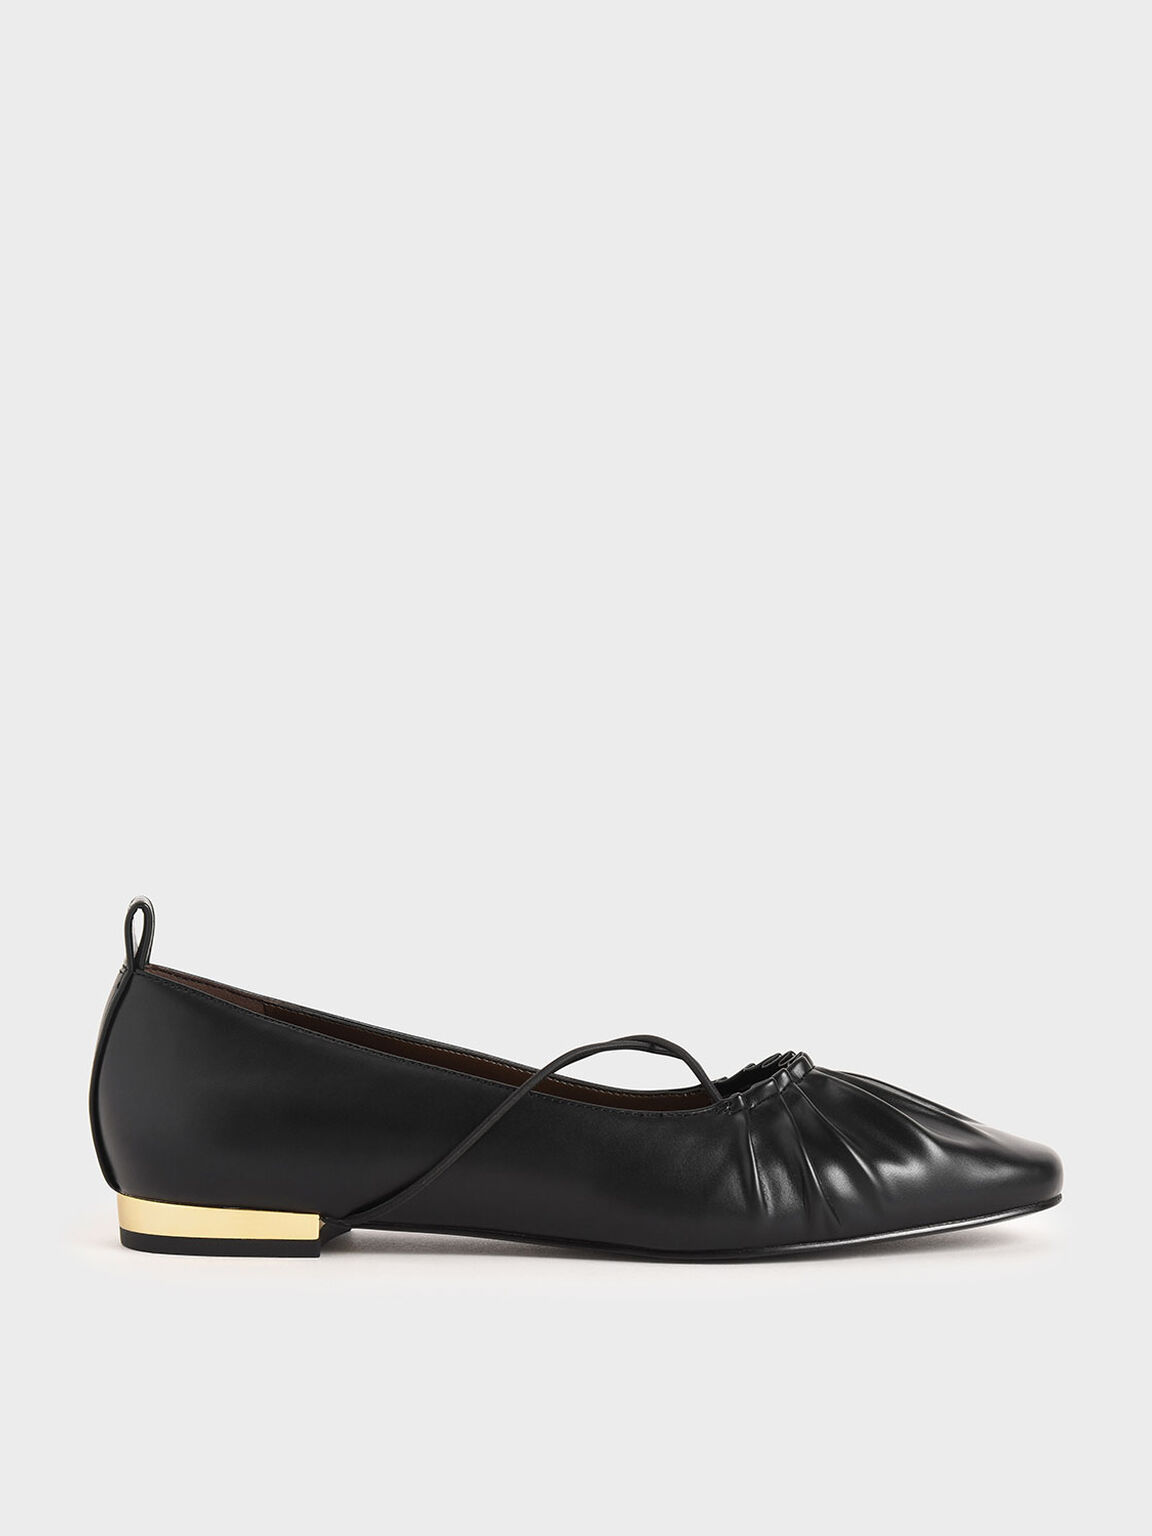 Black Criss-Cross Ruched Ballerina Flats - CHARLES & KEITH KR